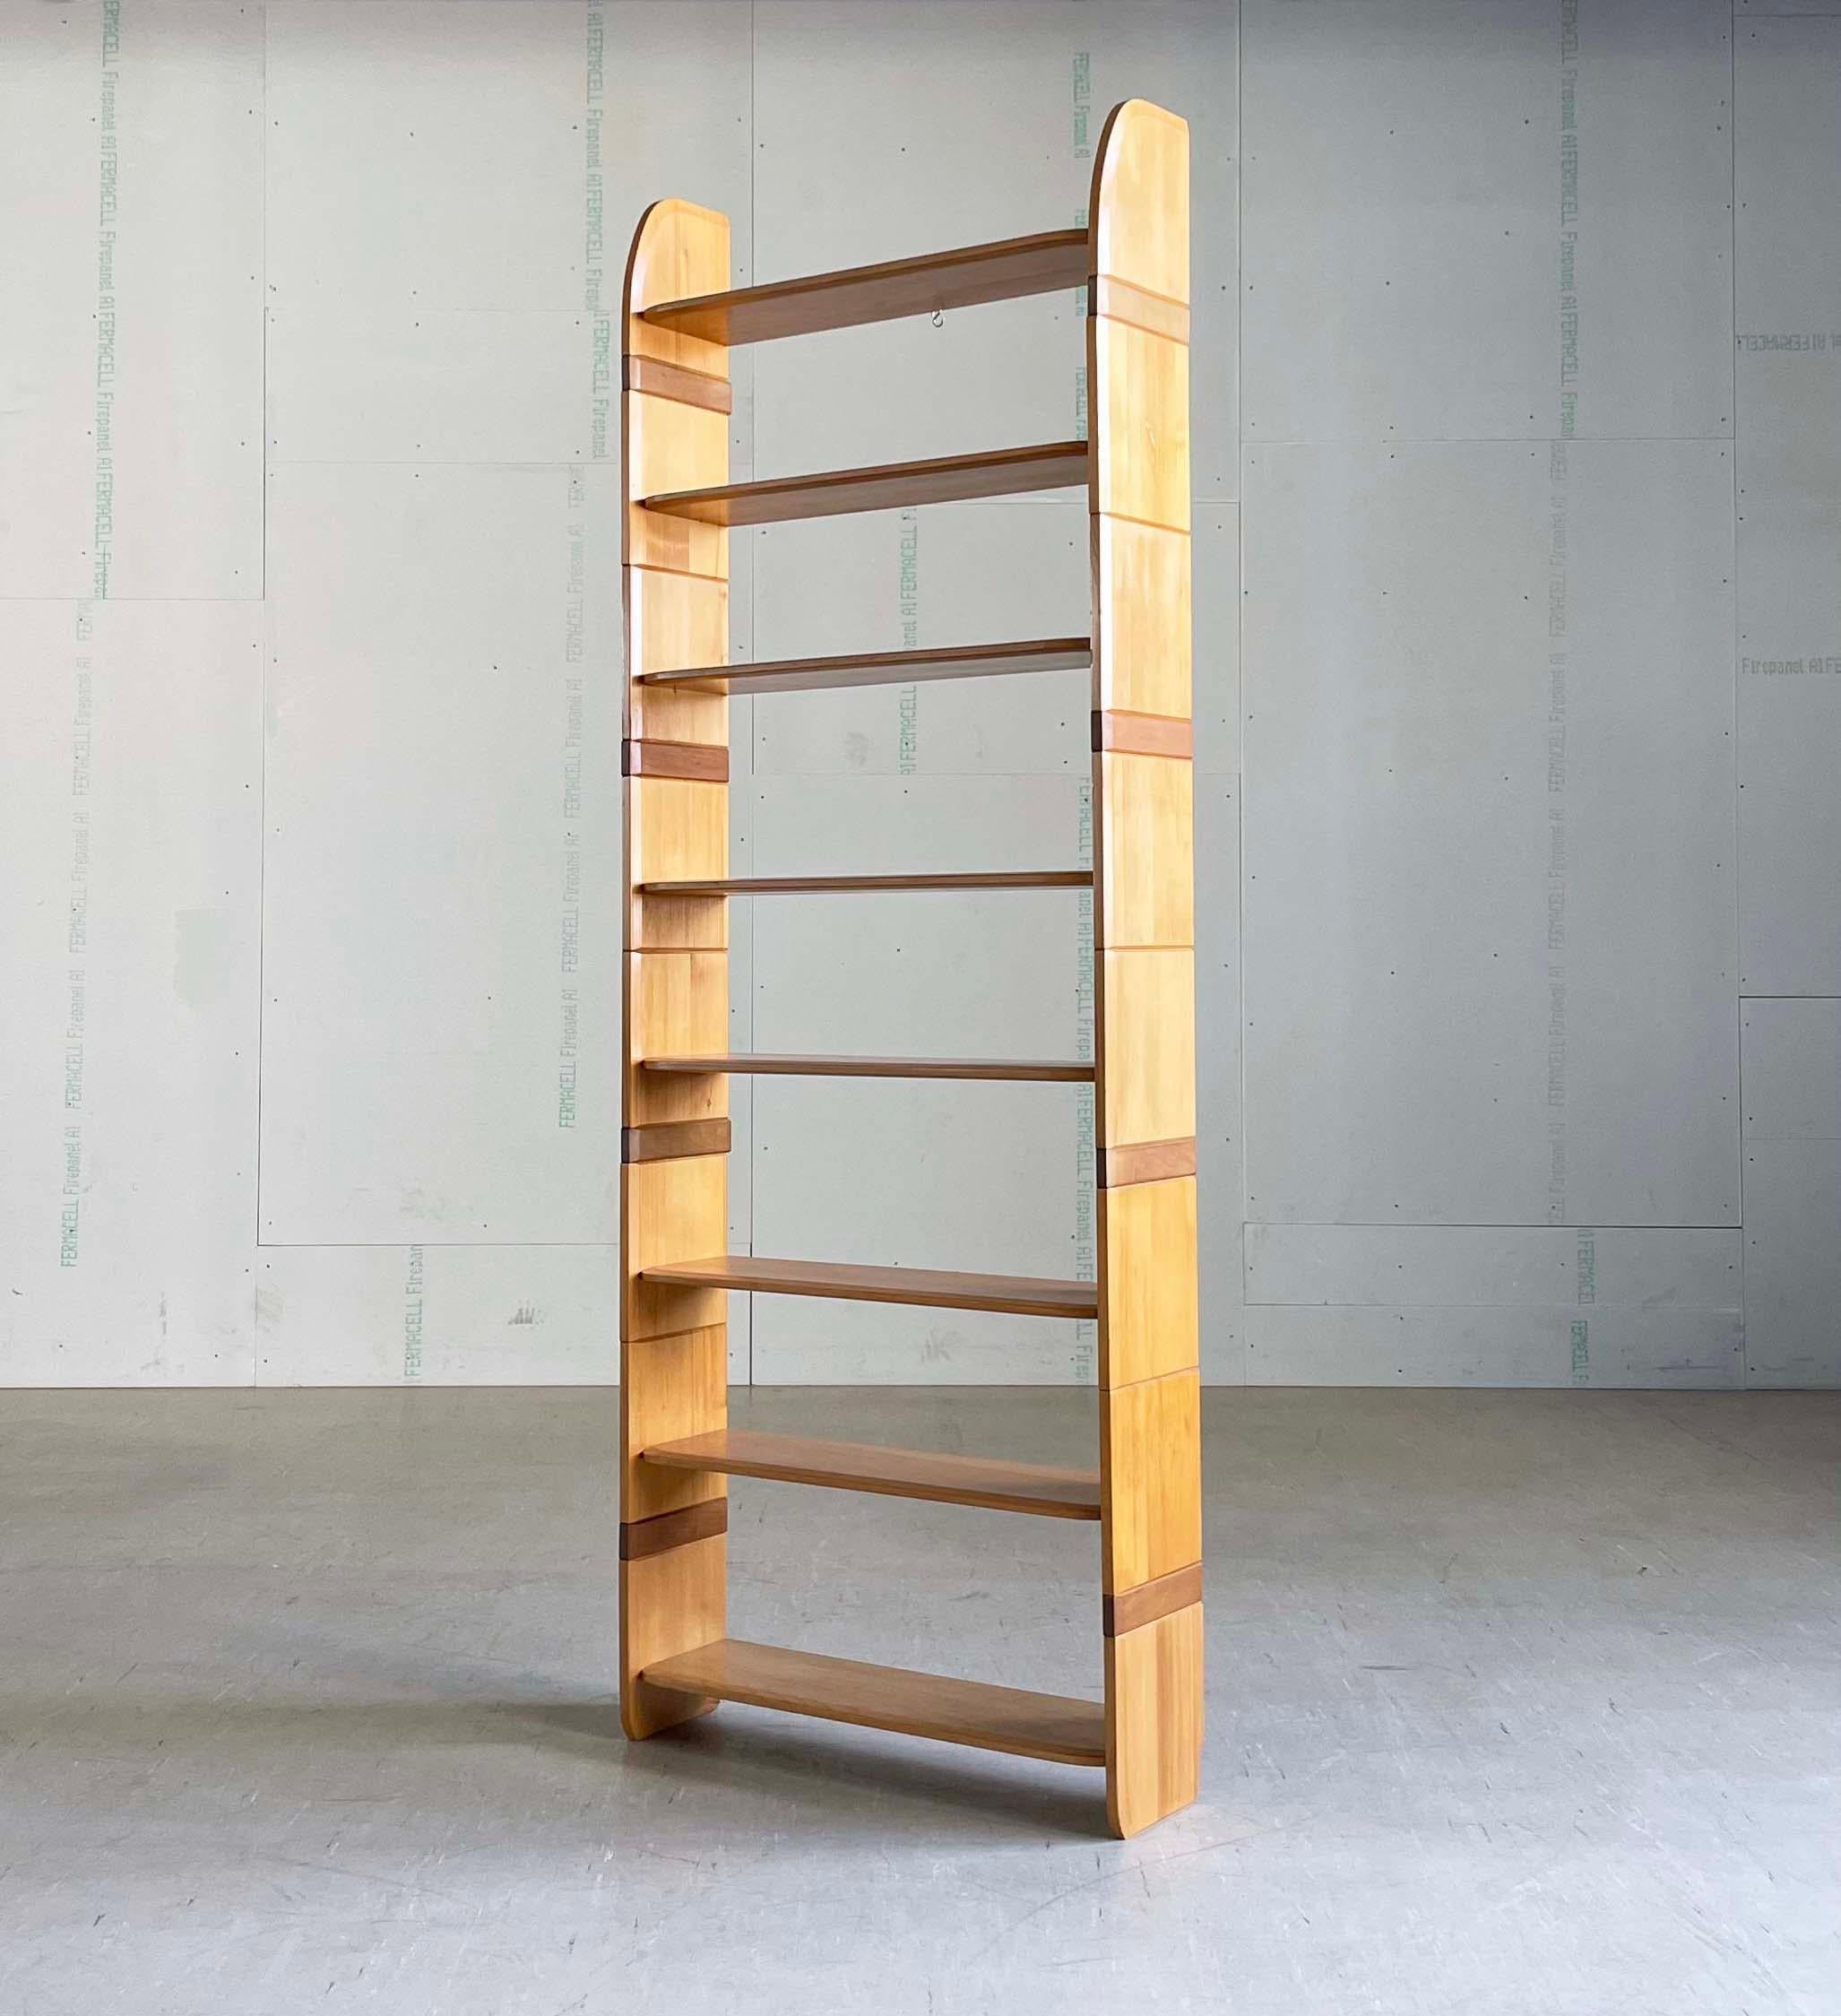 1940's Arthur Milani Modular Wall Shelving for Wohnhilfe, Switzerland. Consists of eight stackable shelves in addition to four pairs of spacers for height adjustment enabling storage of larger / smaller books or decor as necessary. The modular